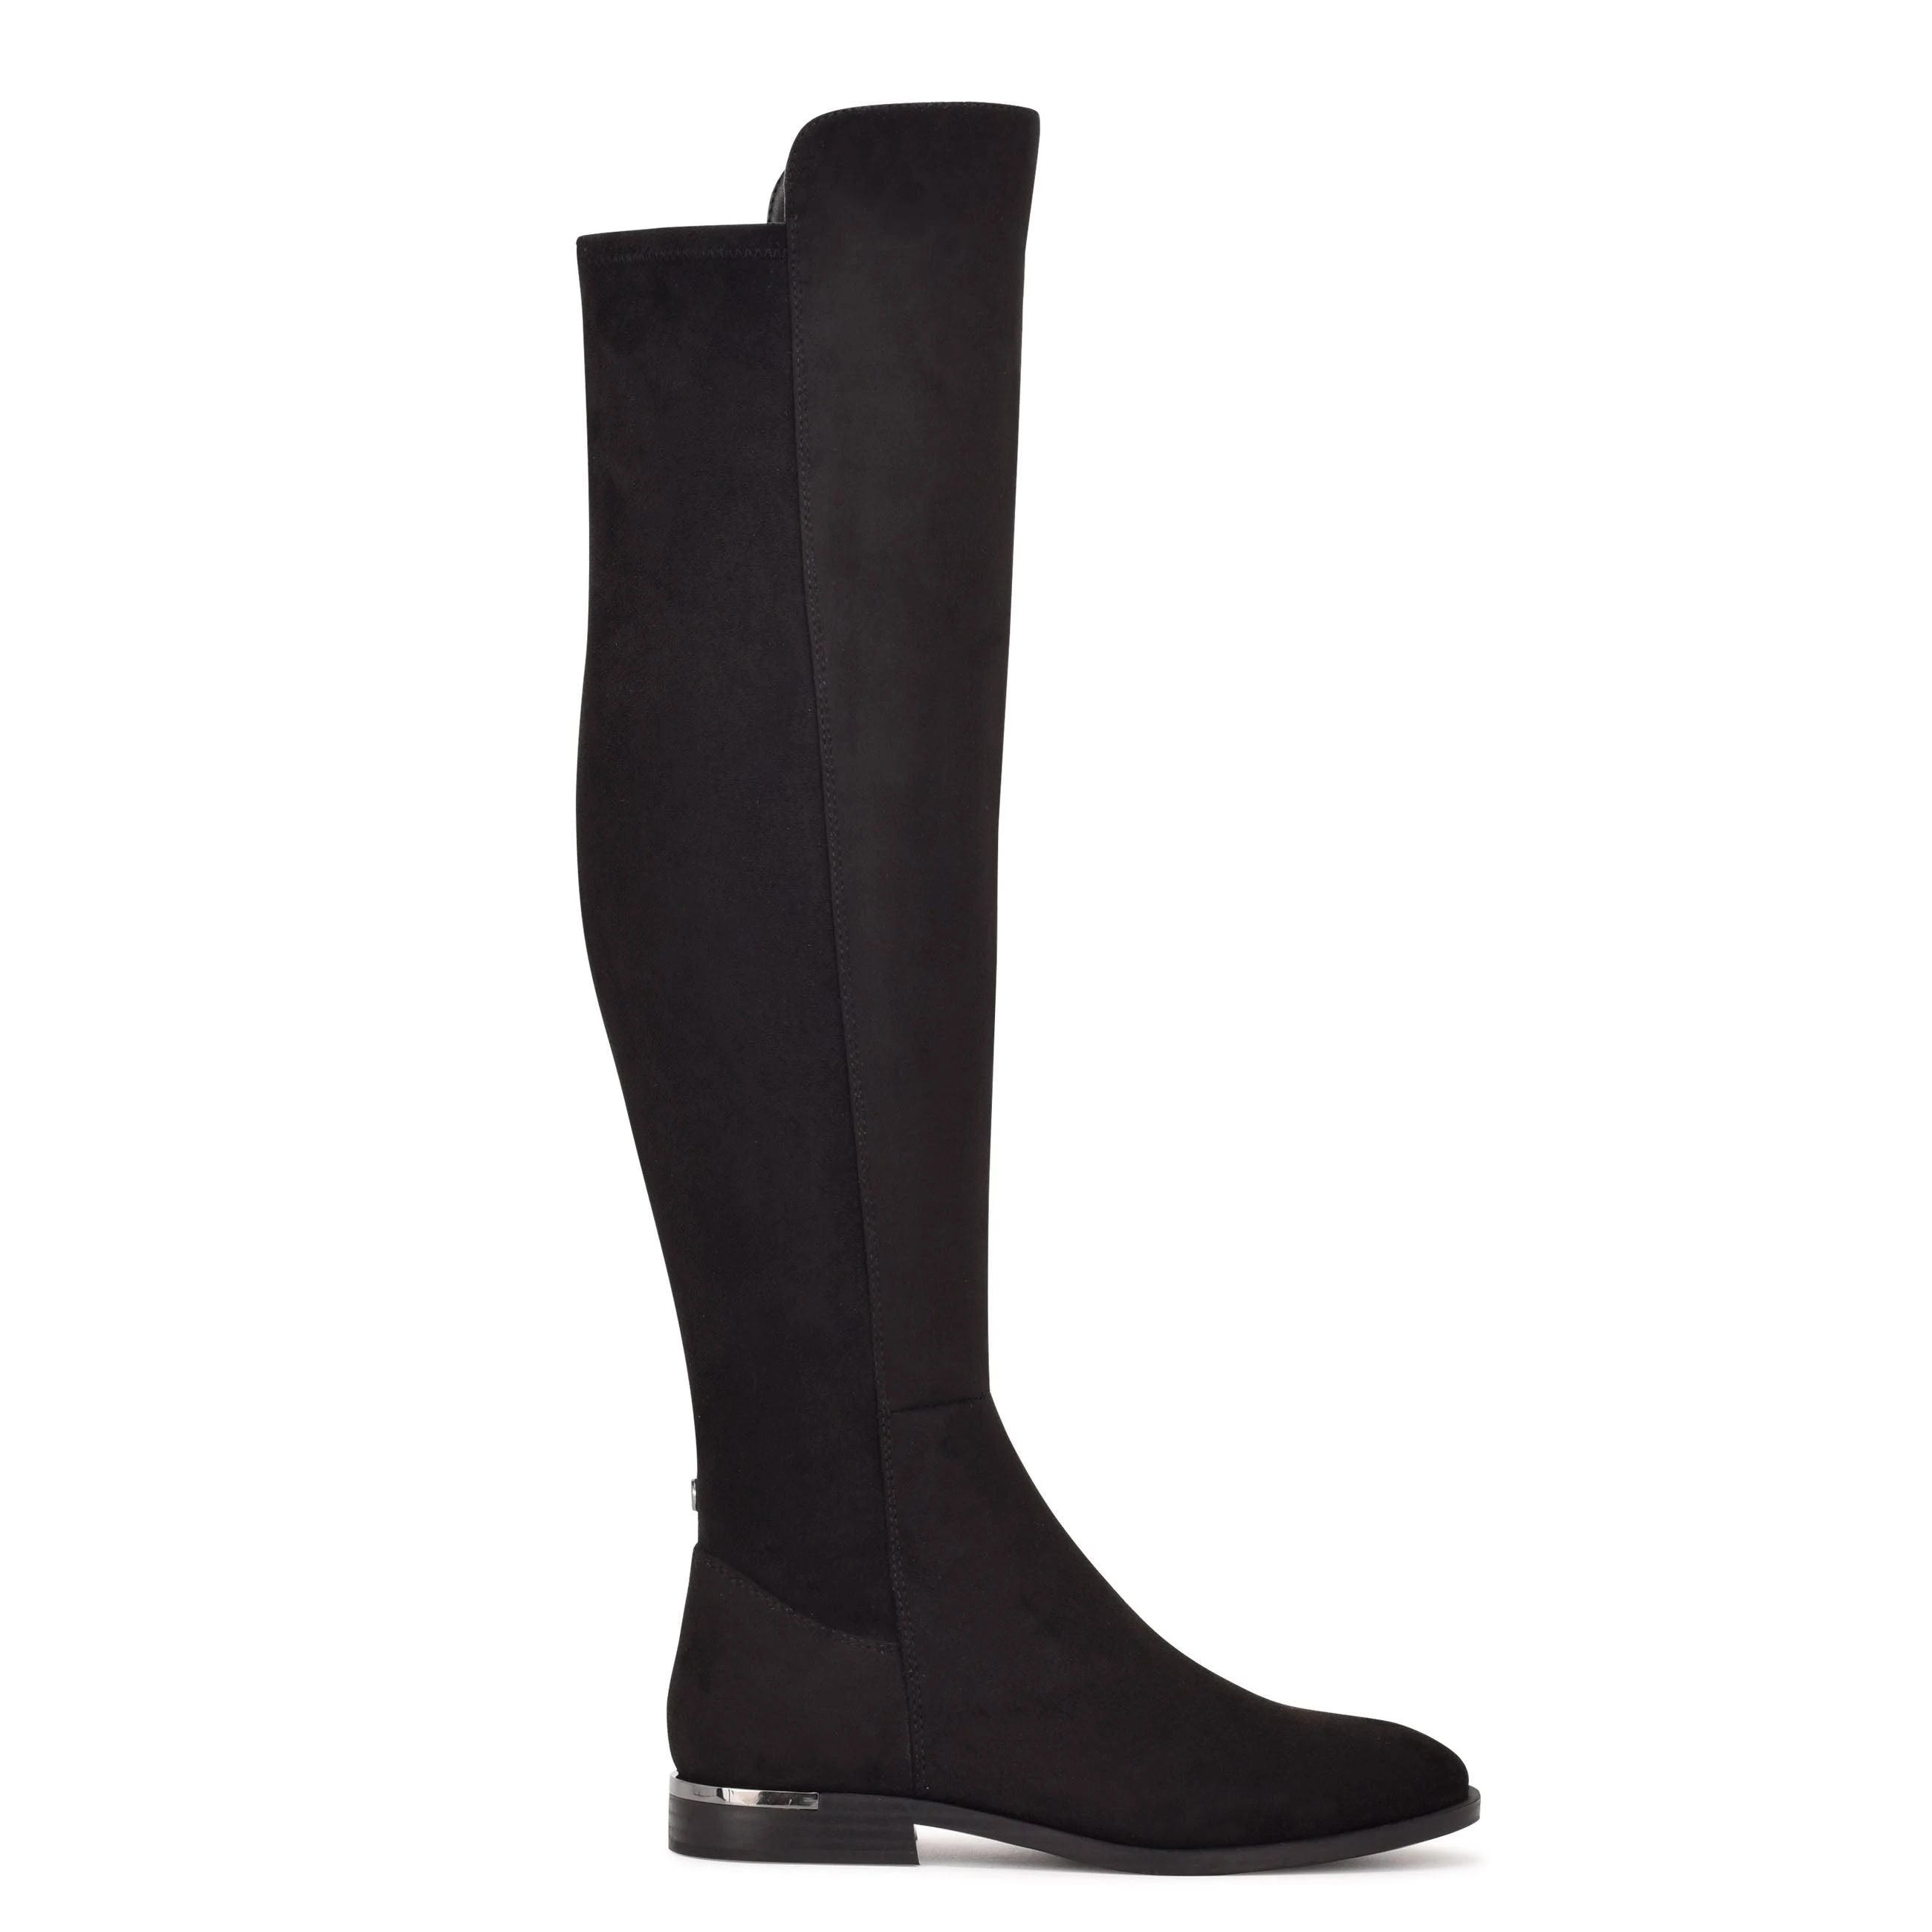 Below Knee Boot with Stretchy Panel and Pull Tab | Image